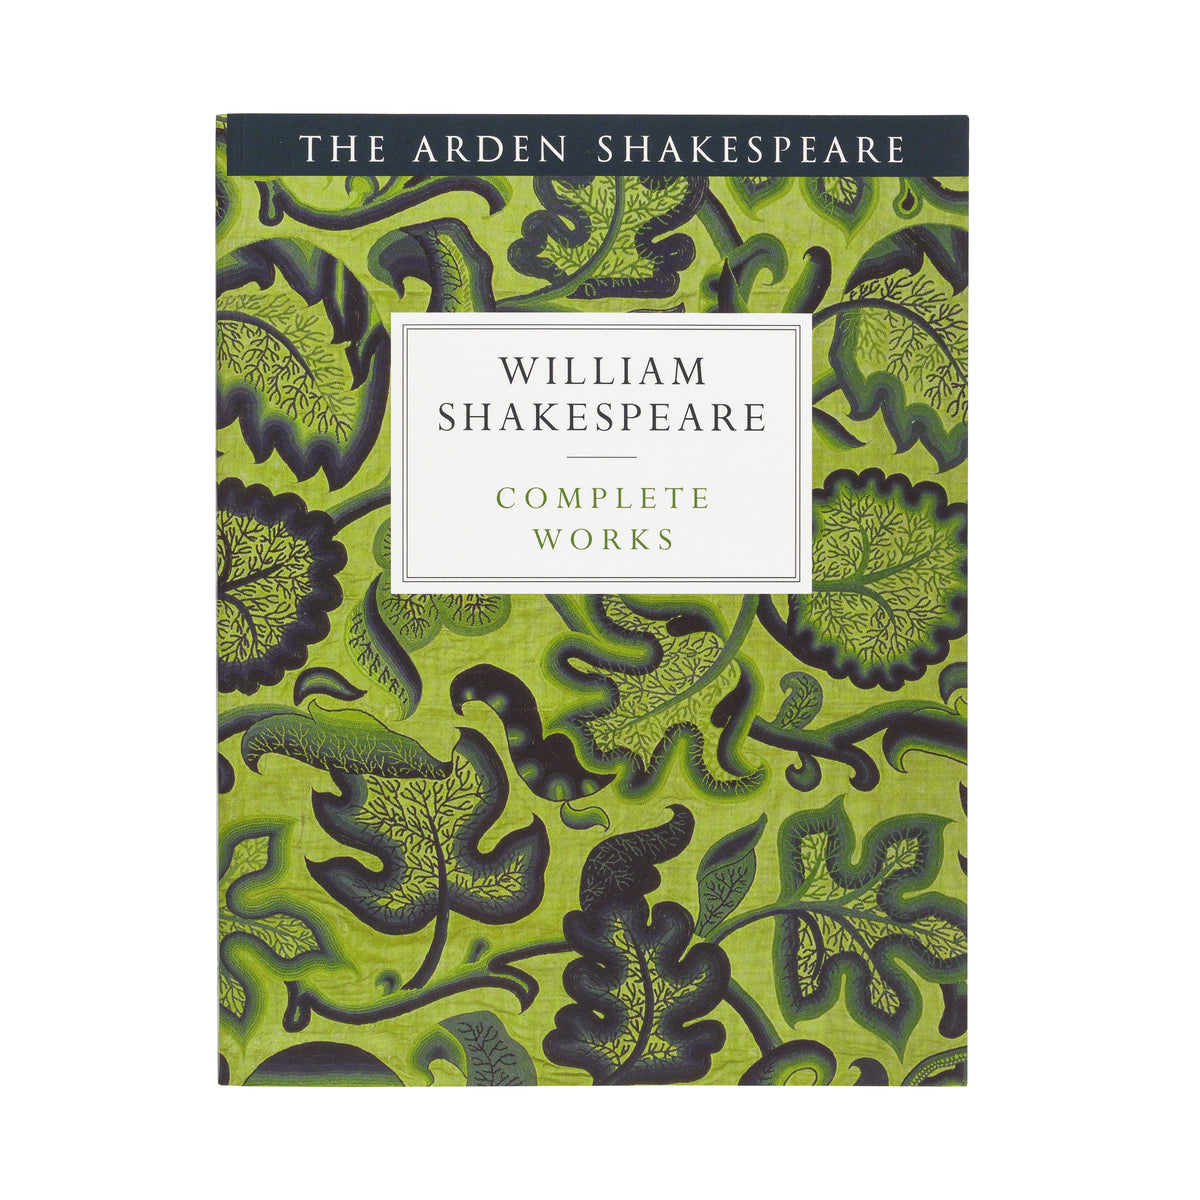 Sco　Shakespeare　edited　Arden　Shakespeare　Ann　Thompson,　by　–　David　The　Works　Complete　Shop